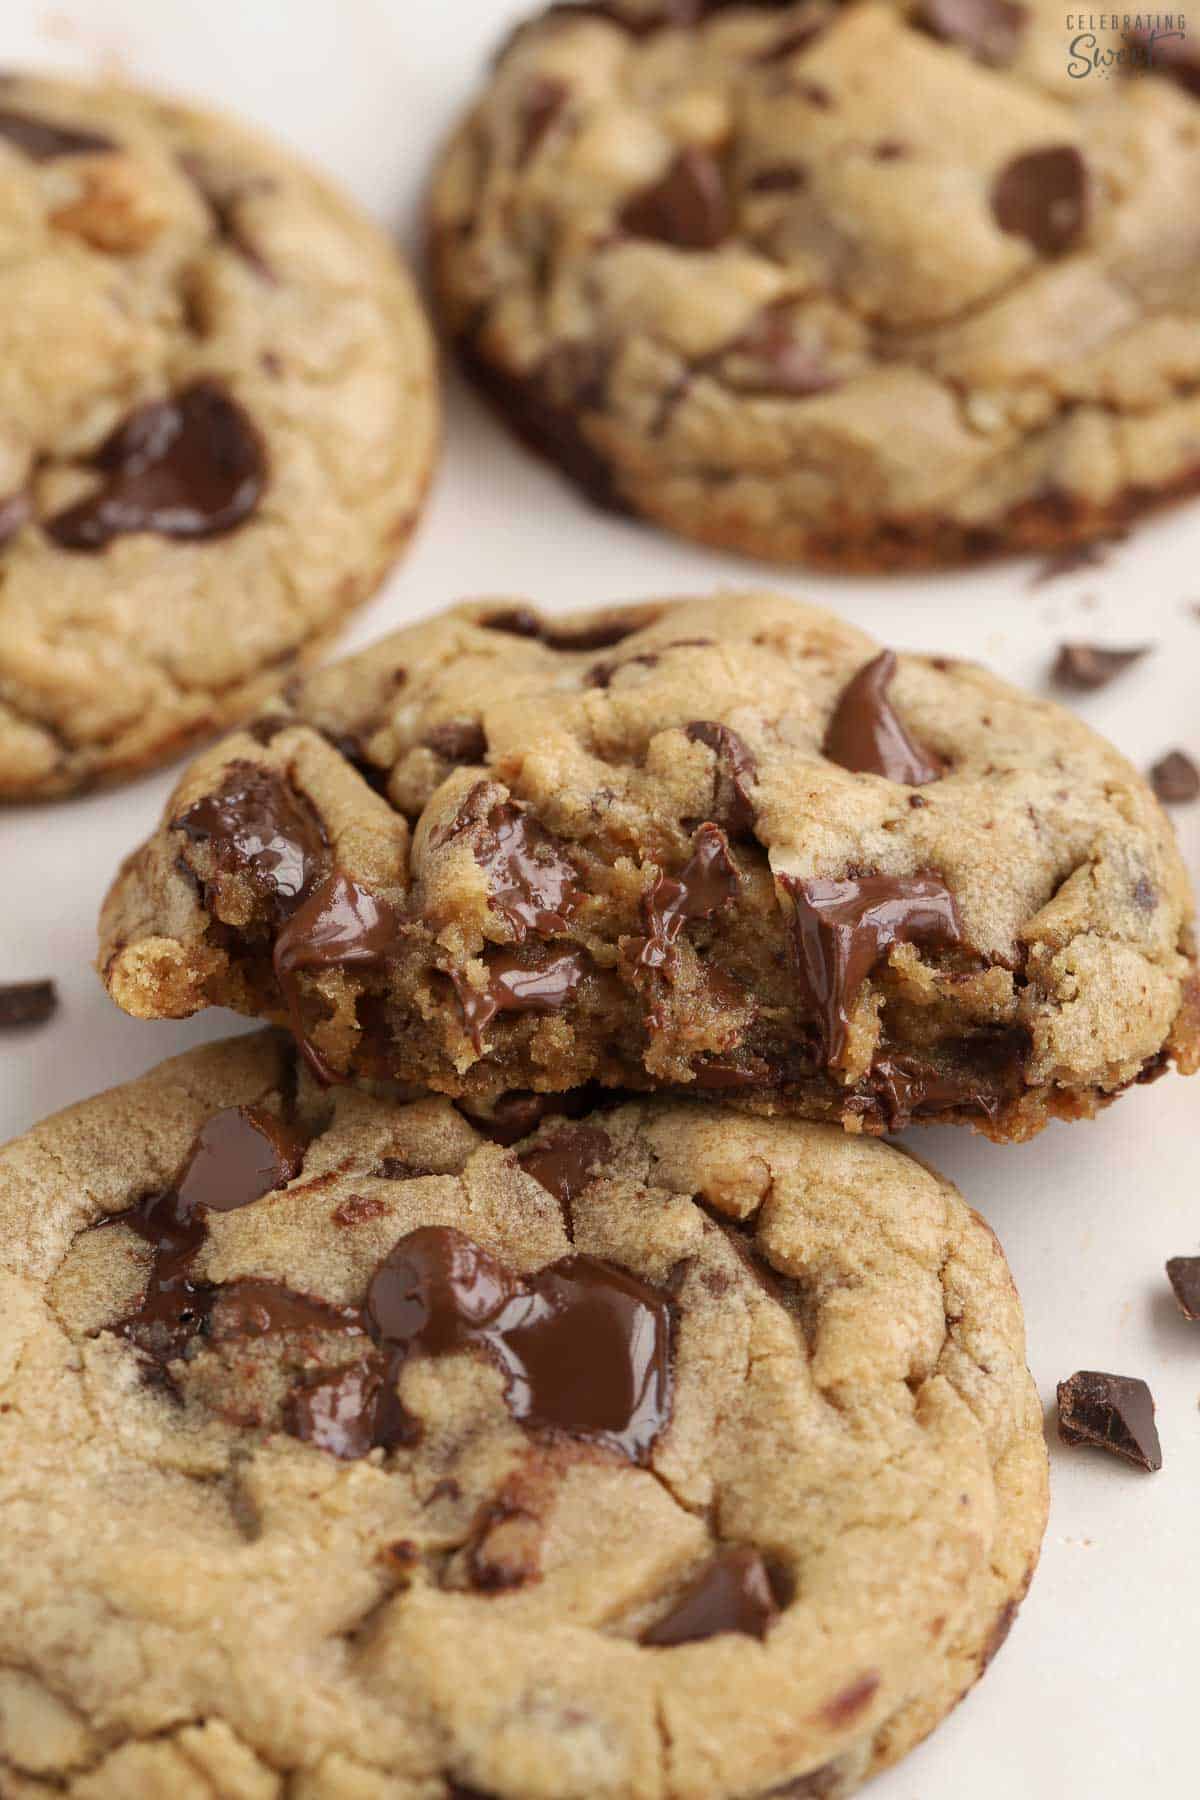 Chocolate chip cookies filled with melted chocolate chips.